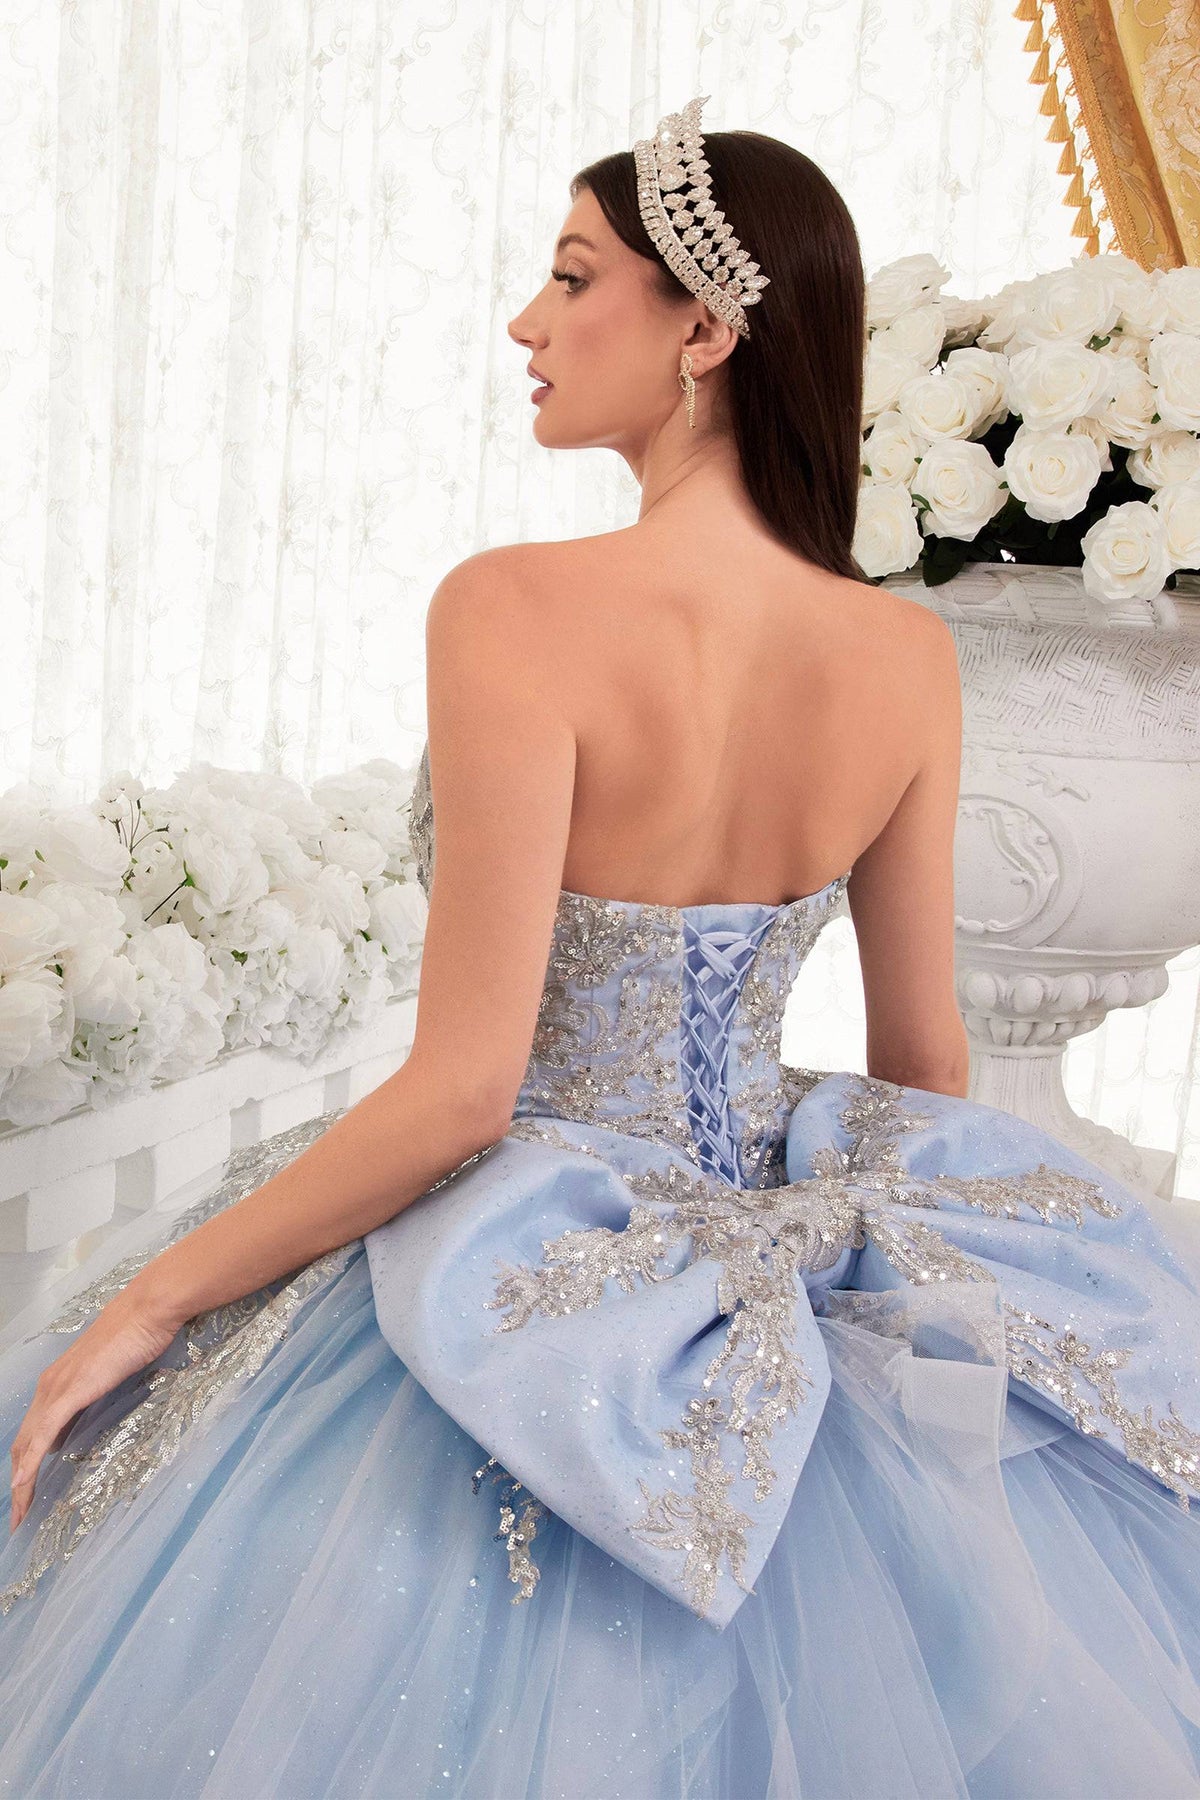 Cinderella Divine 15715 Ladivine Strapless Ball Gown Quinceanera Dress - NORMA REED